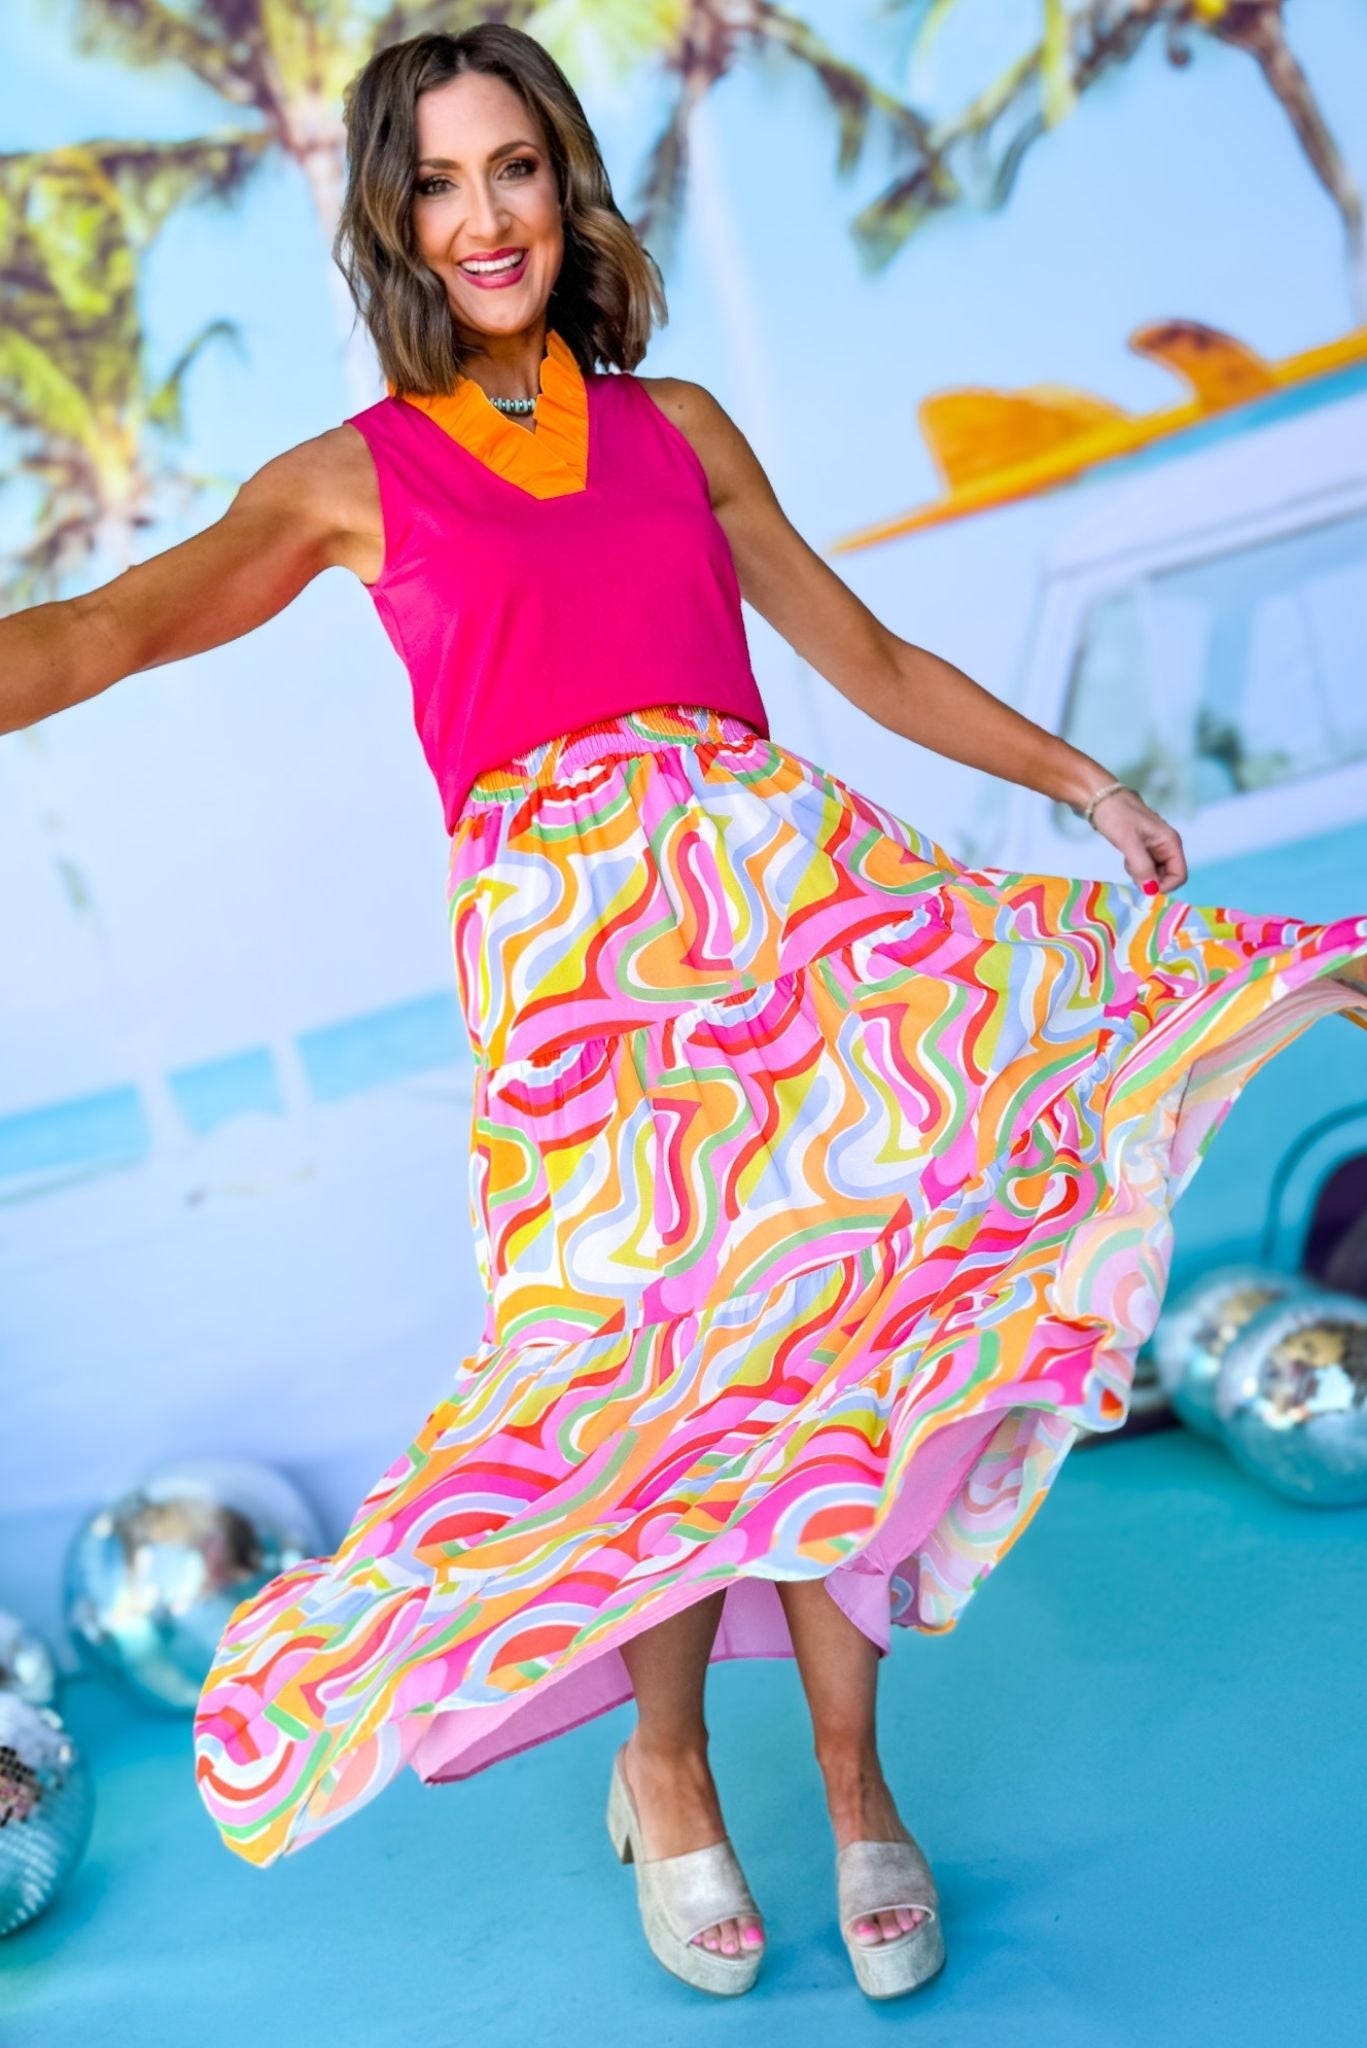 SSYS The Sadie Maxi Skirt In Swirl, ssys the label, spring break skirt, spring break style, spring fashion affordable fashion, elevated style, bright style, printed skirt, mom style, shop style your senses by mallory fitzsimmons, ssys by mallory fitzsimmons